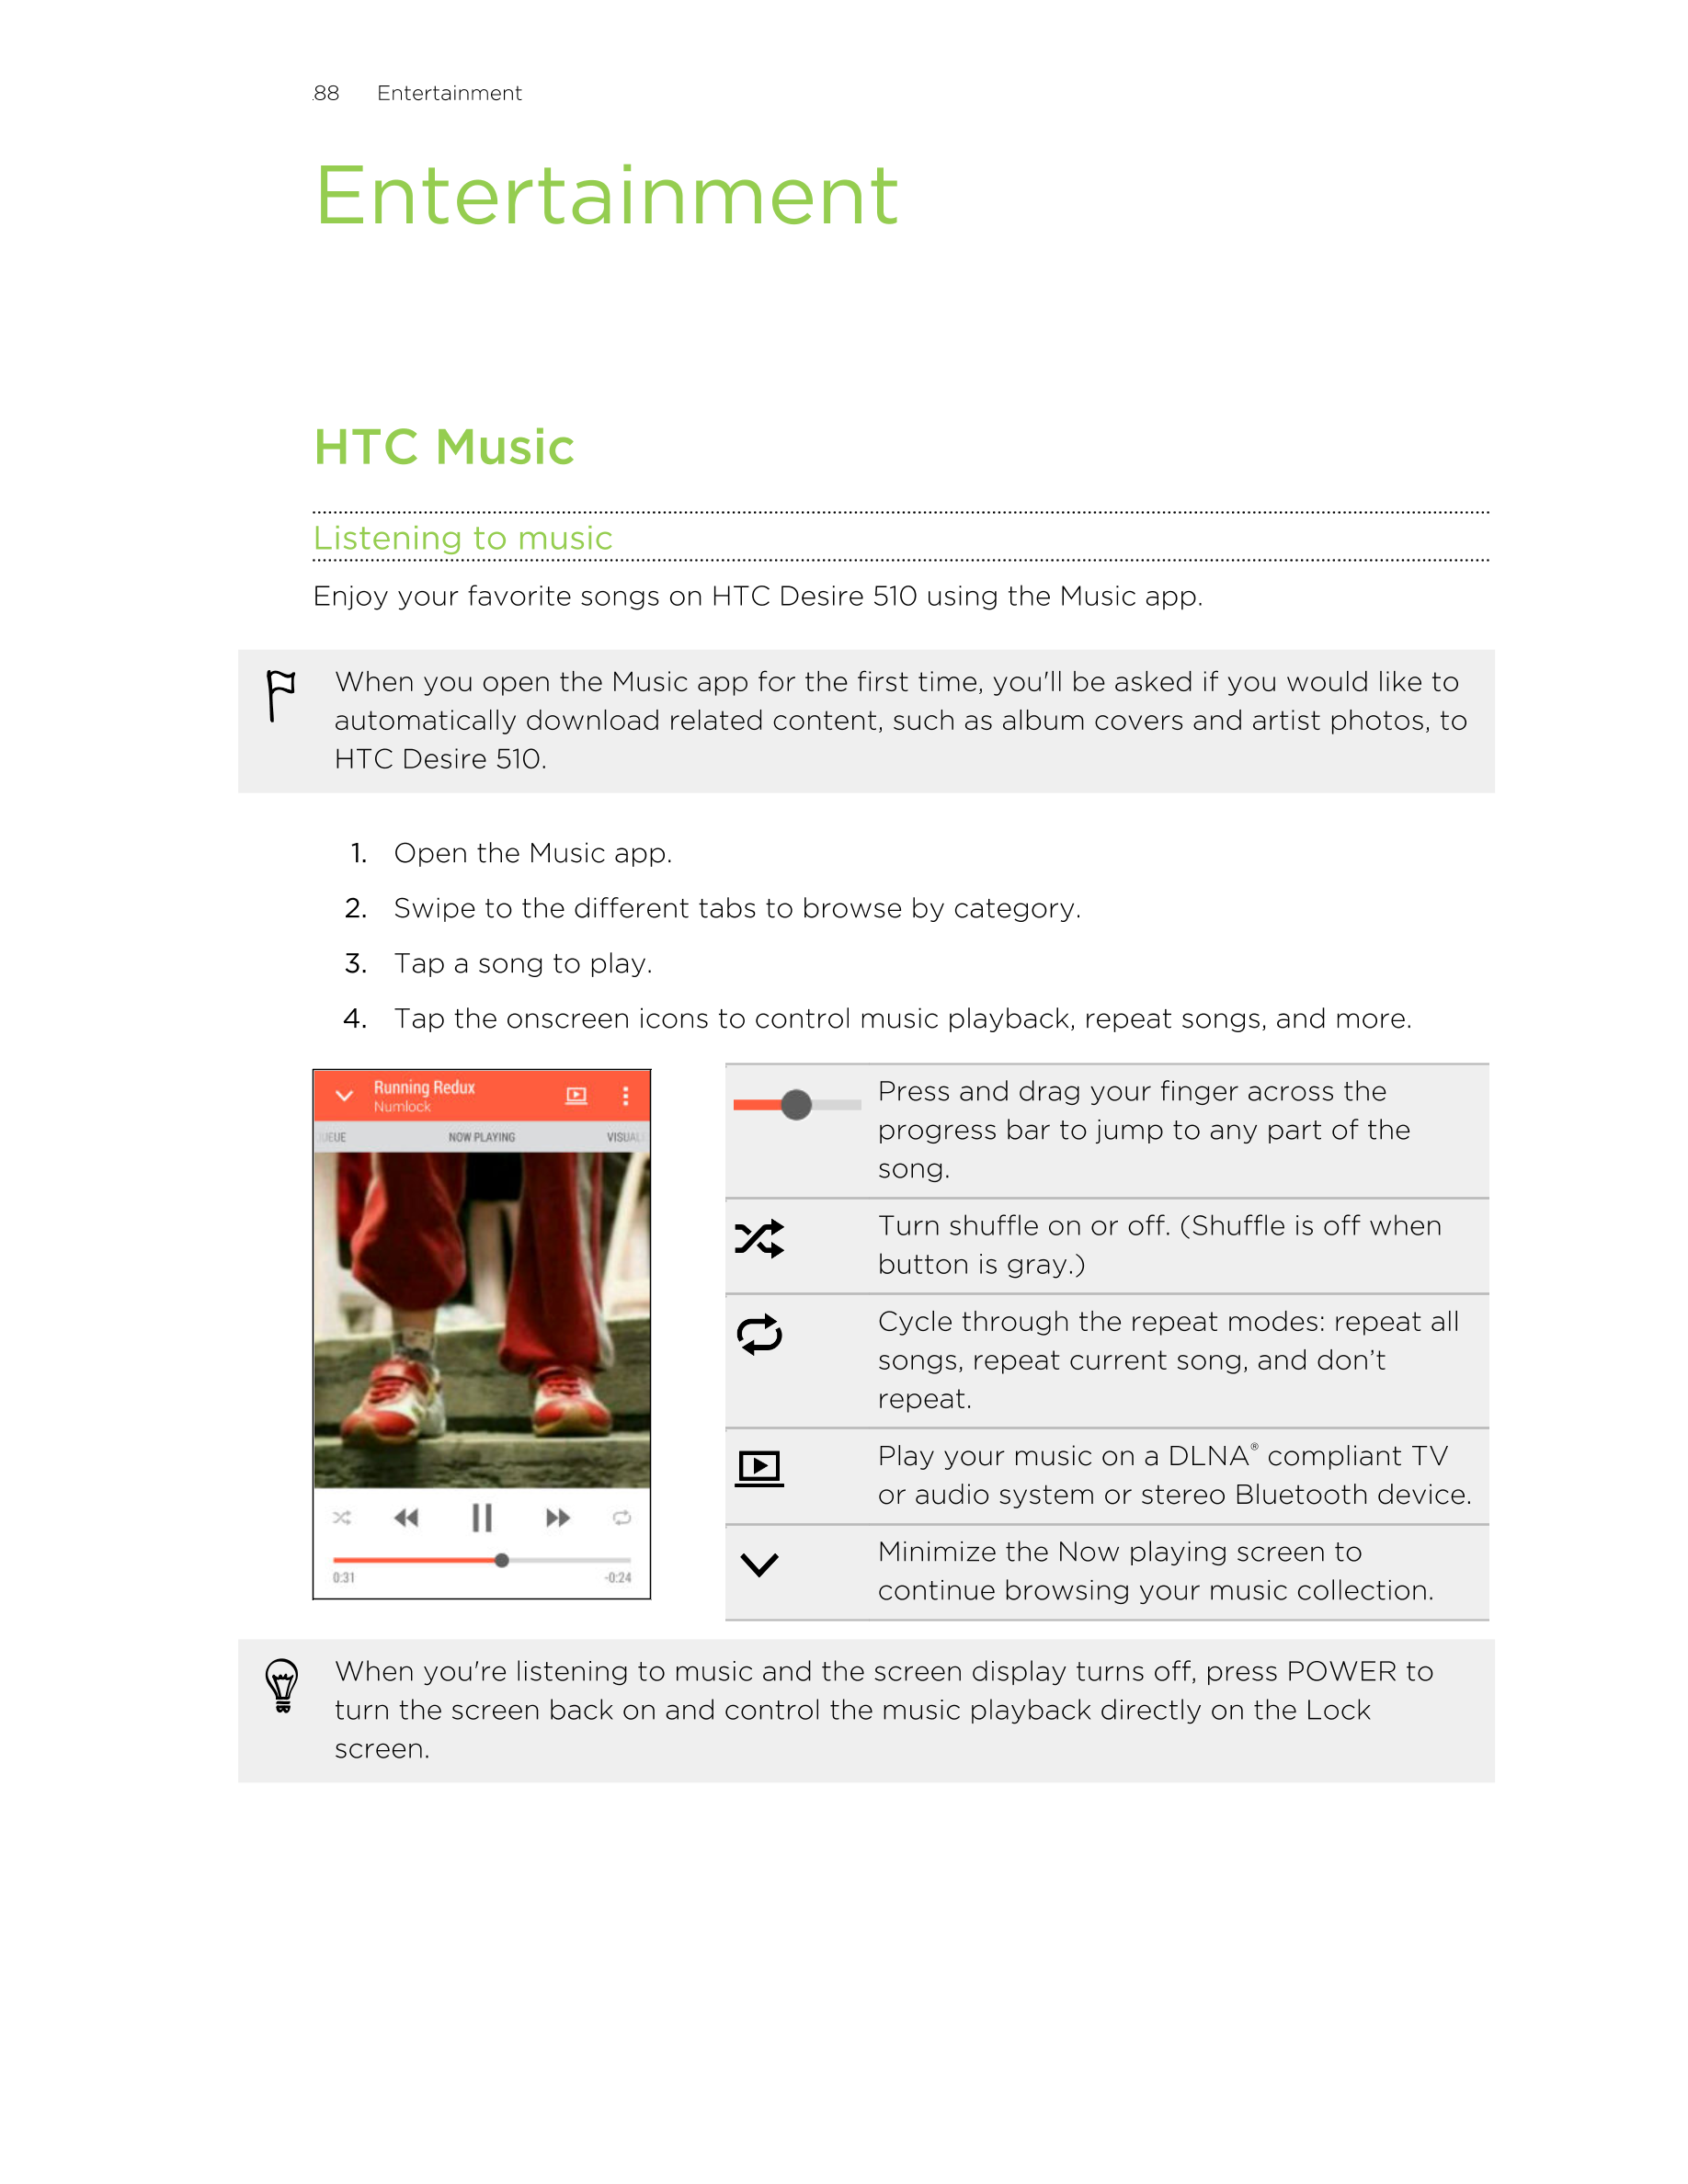 88      Entertainment
Entertainment
HTC Music
Listening to music
Enjoy your favorite songs on HTC Desire 510 using the Music app